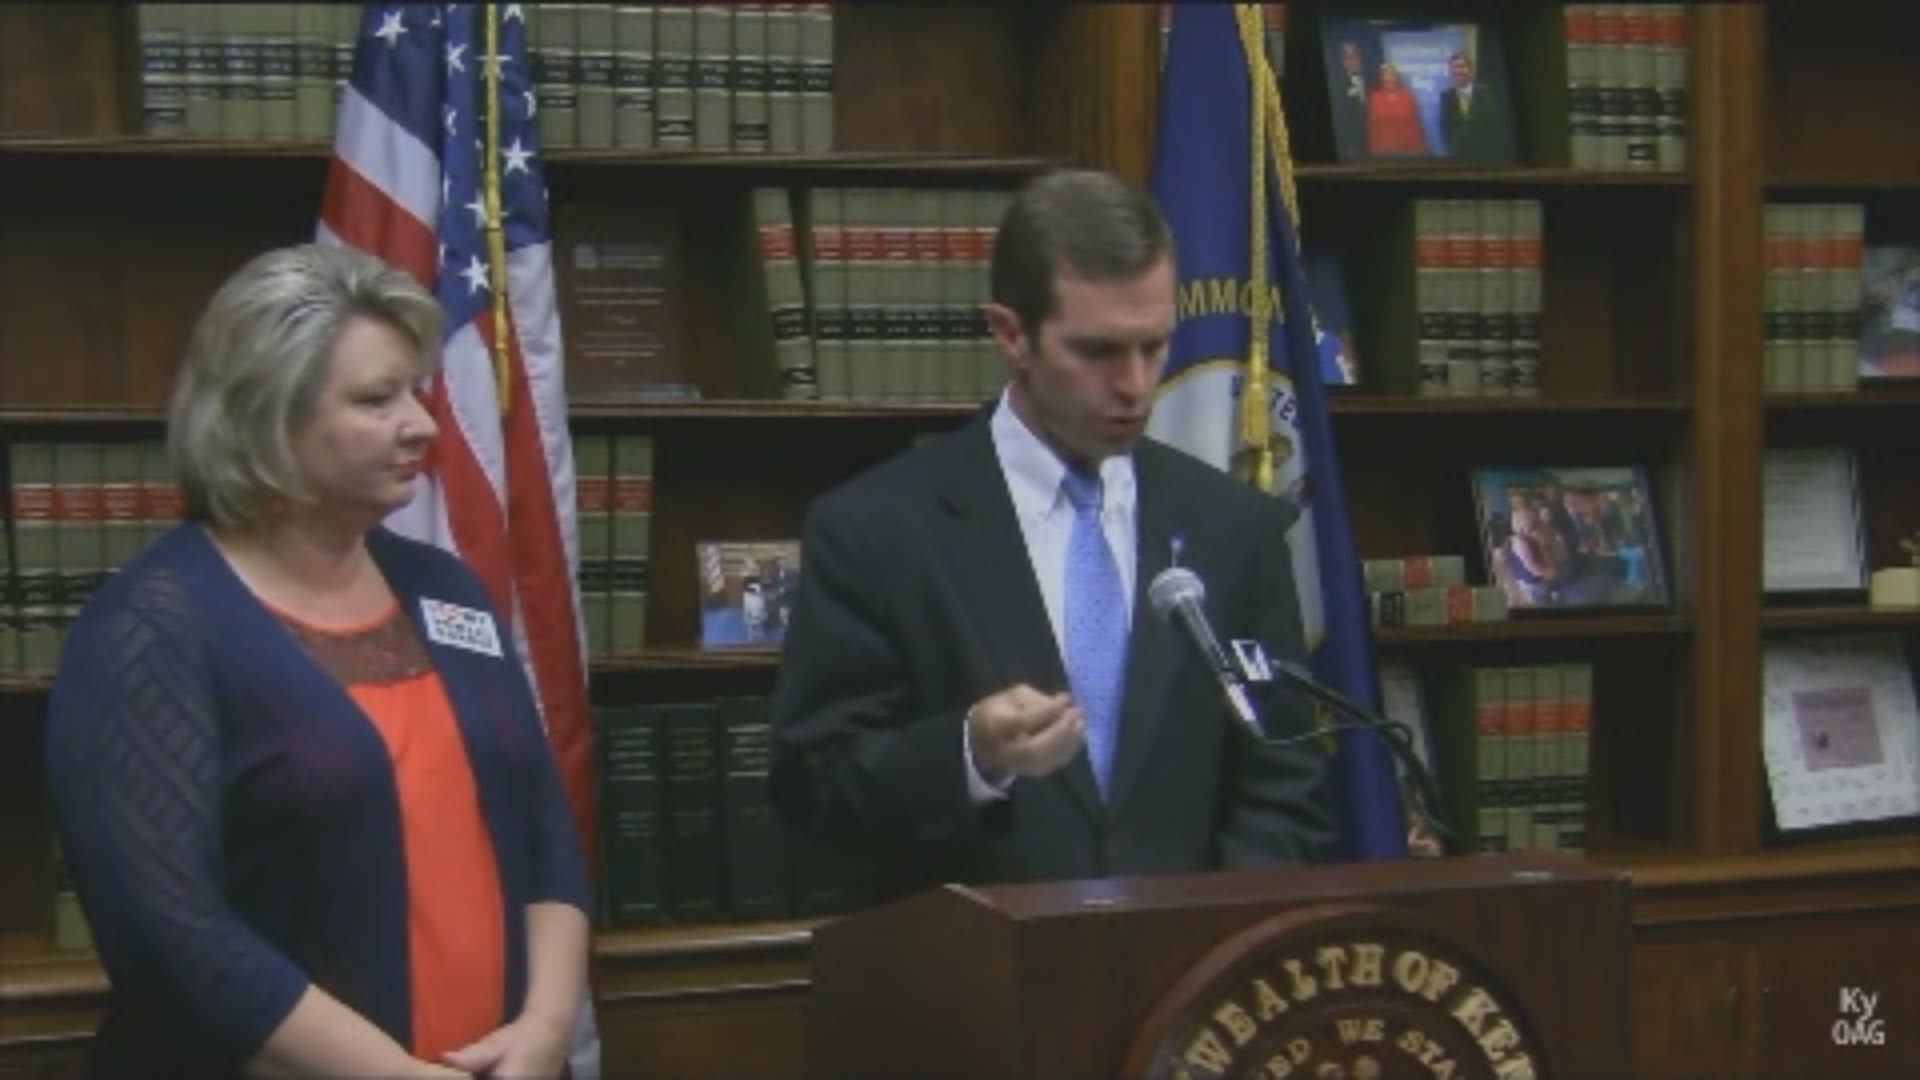 Beshear said the bill was unconstitutional and said, "In the Commonwealth, when you make a promise, you keep it...." (VIDEO via AG Andy Beshear's YouTube Channel)